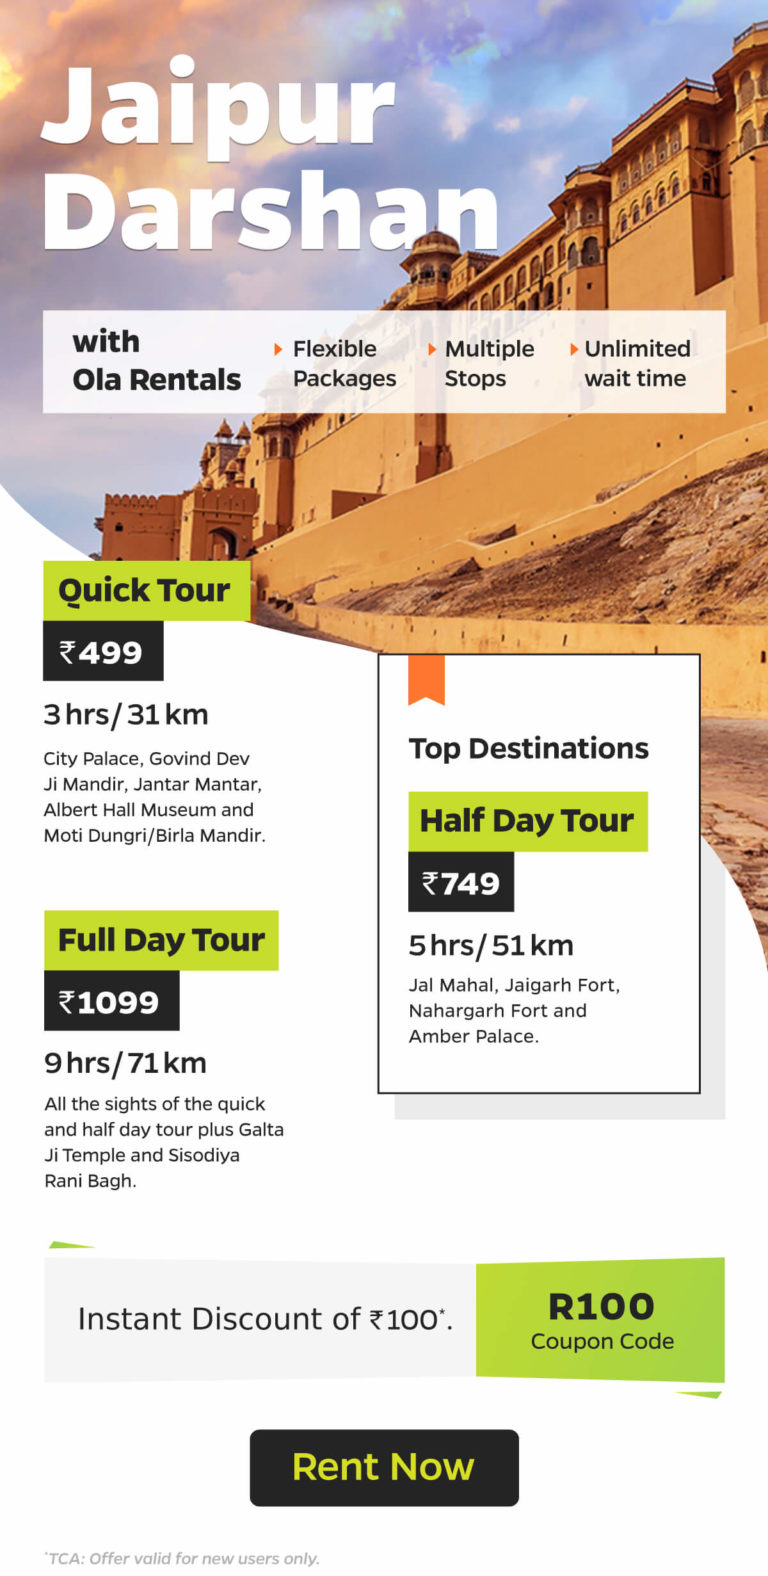 Top Jaipur attractions await with Ola Rentals! - Olacabs Blogs